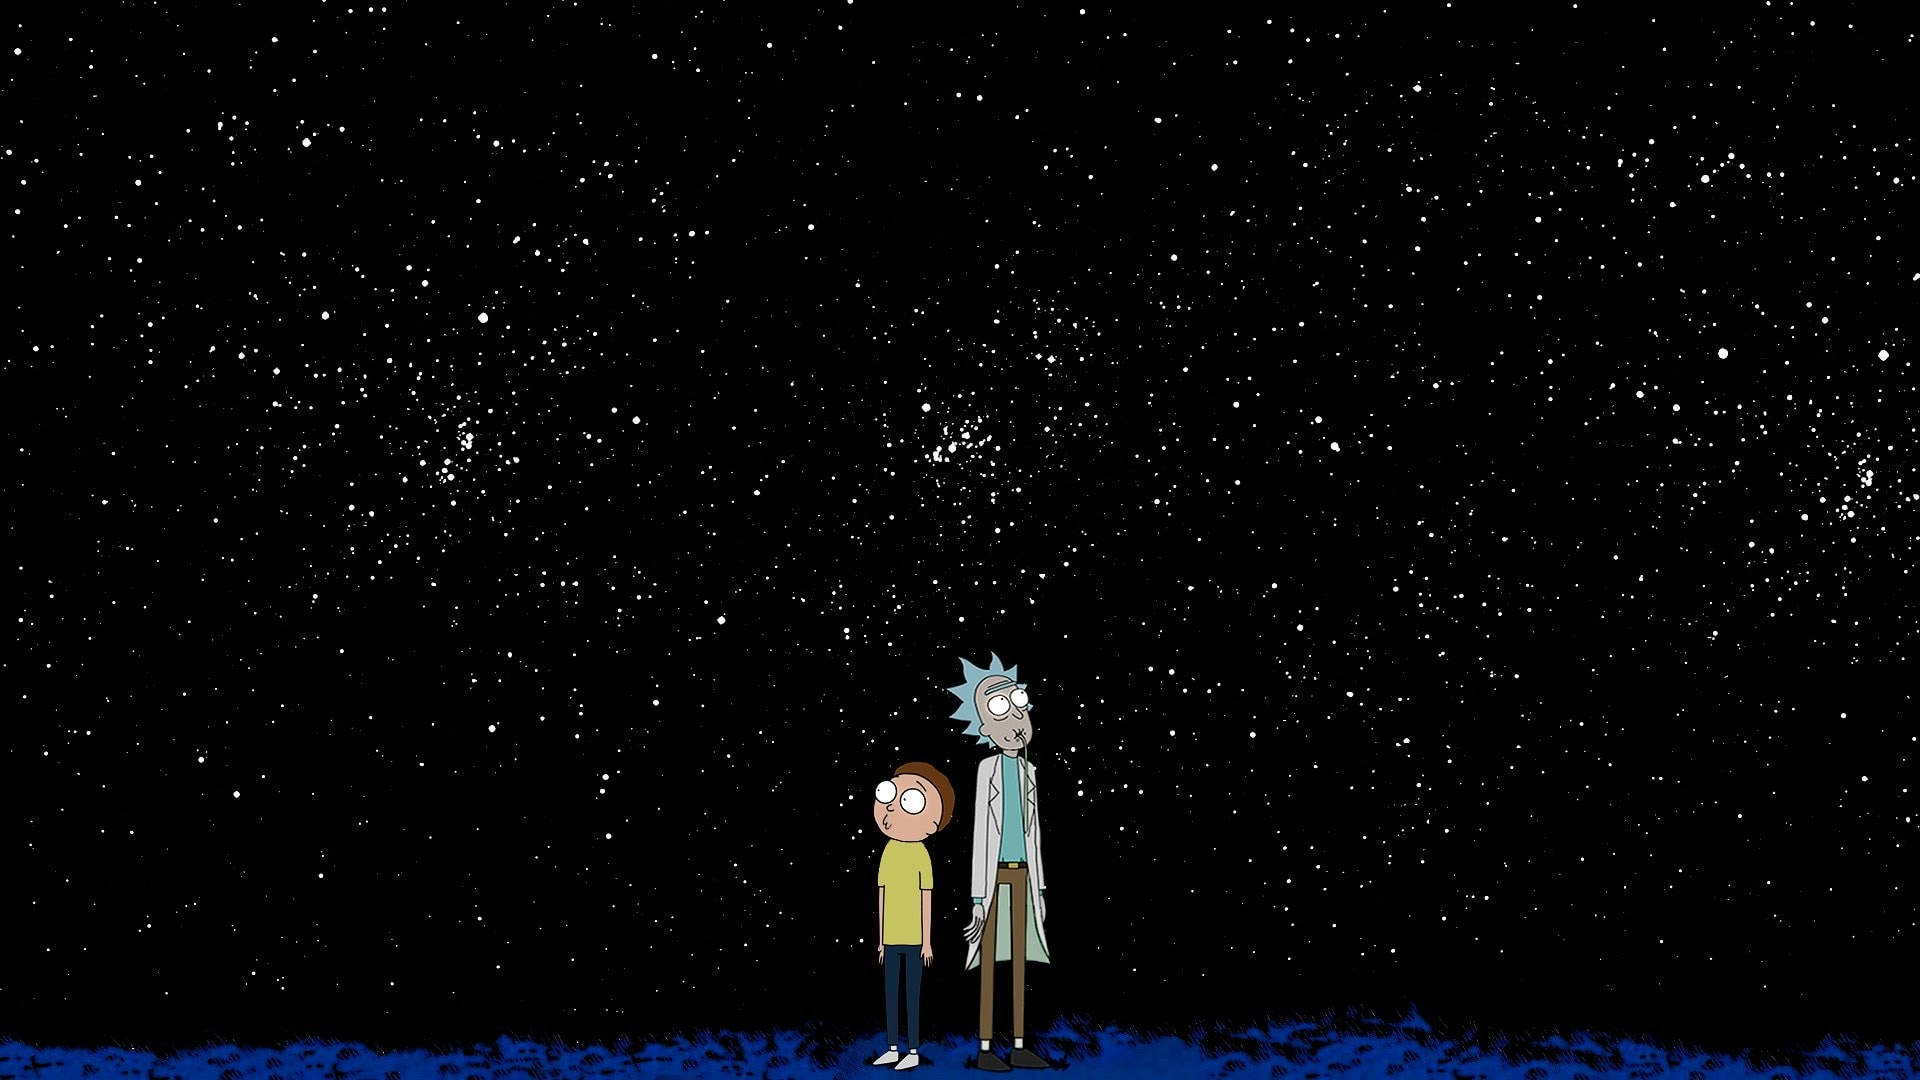 Rick And Morty Cool Image With A Starry Background